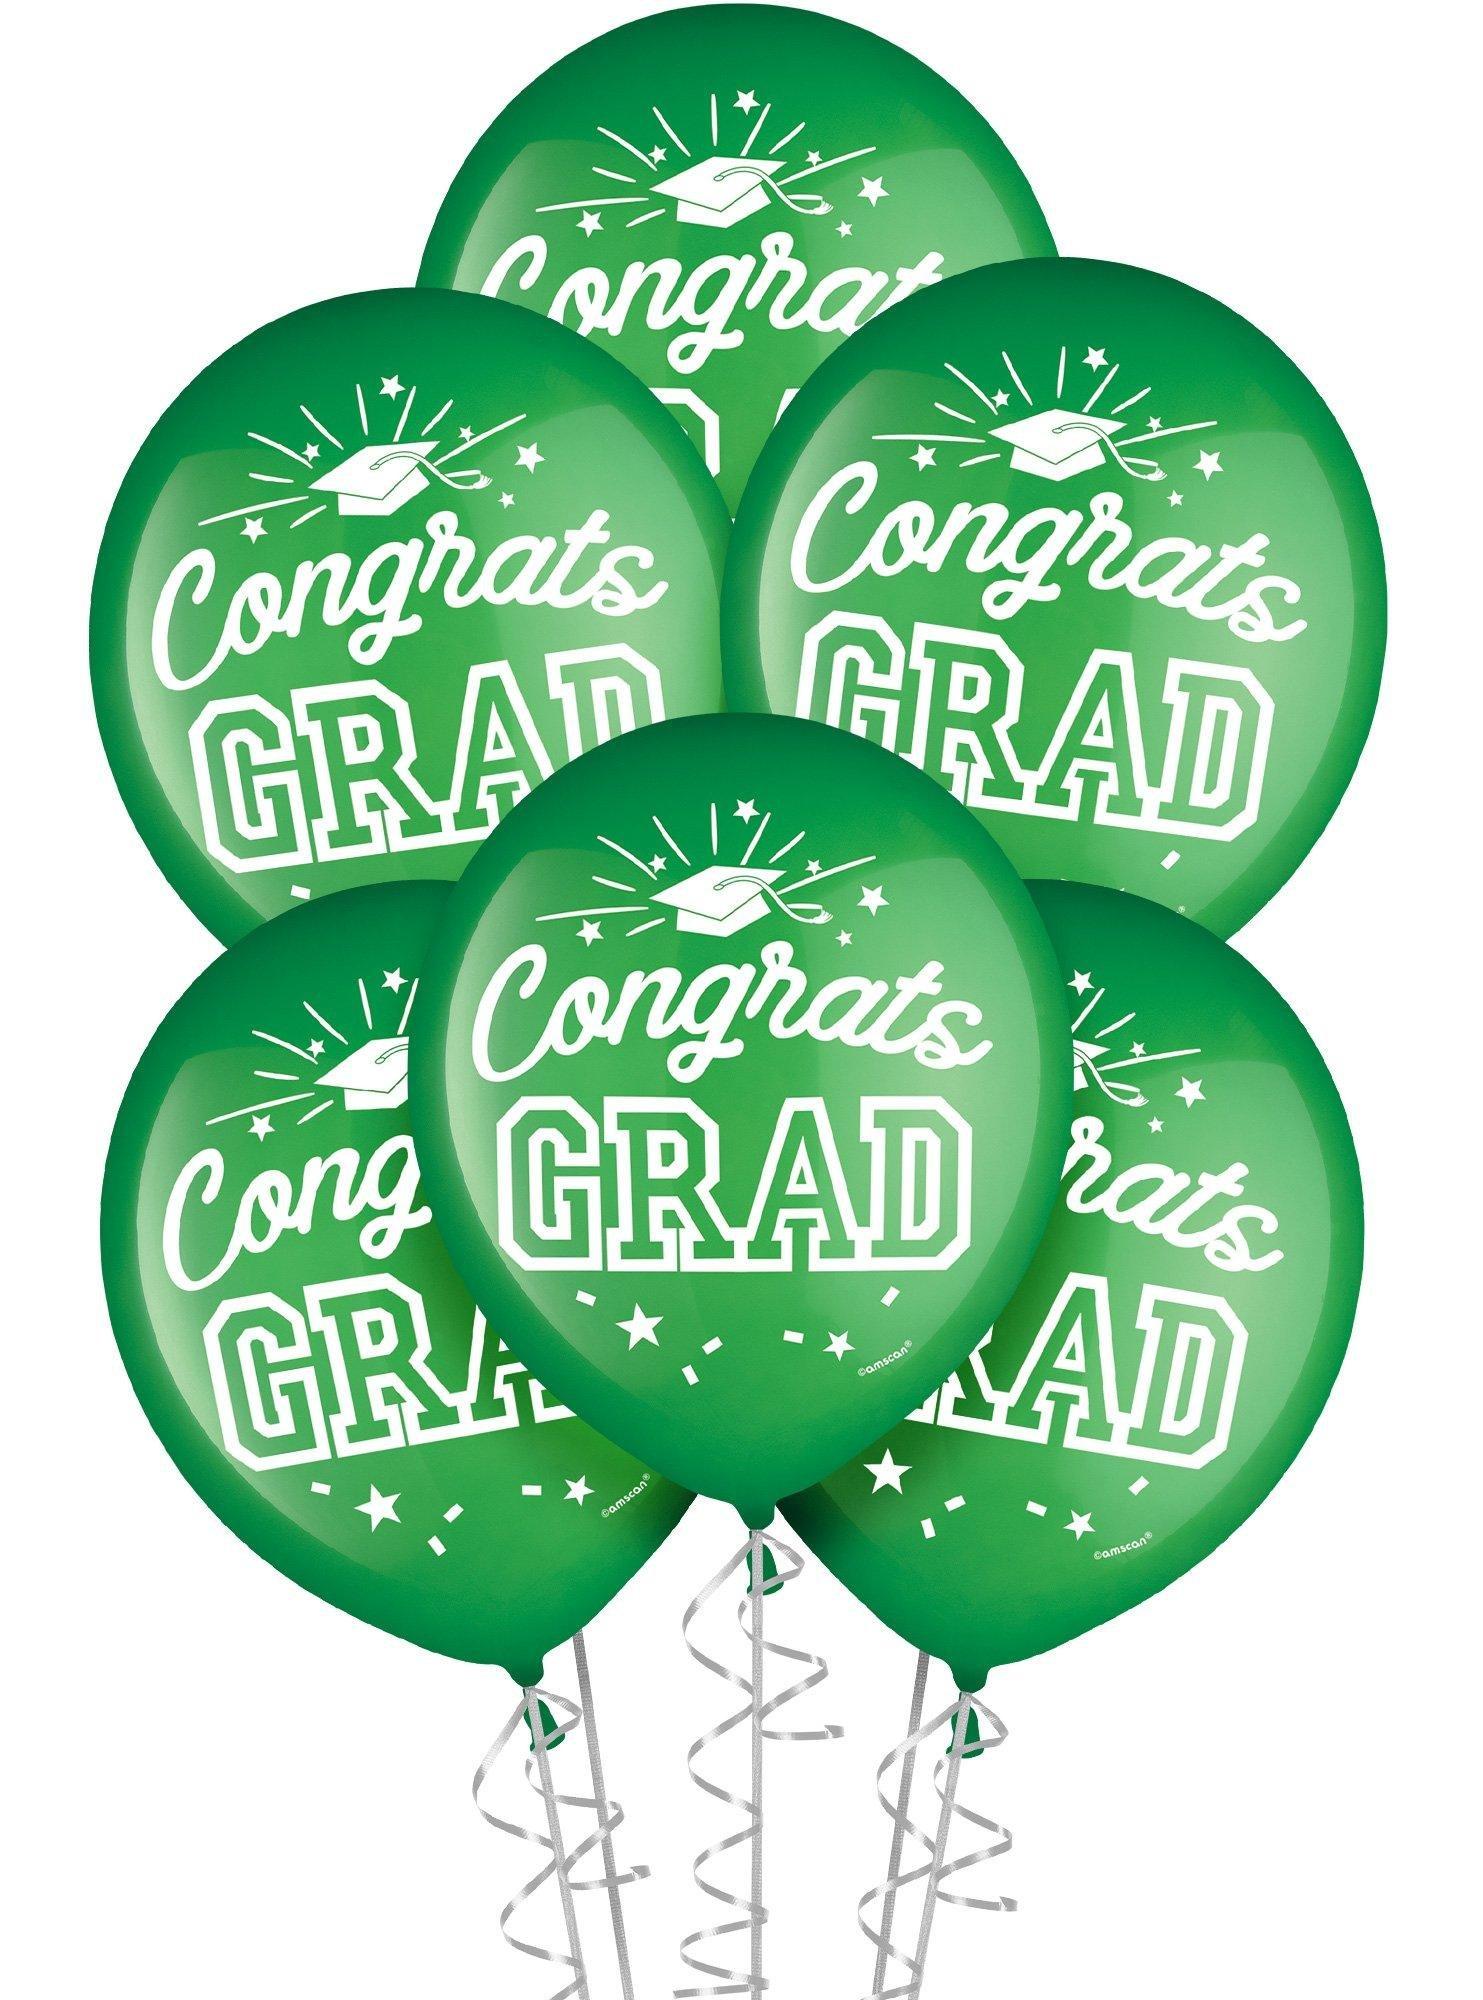 Graduation Party Outdoor Decorations Kit with Banners, Balloons, Yard Signs - Green 2024 Congrats Grad